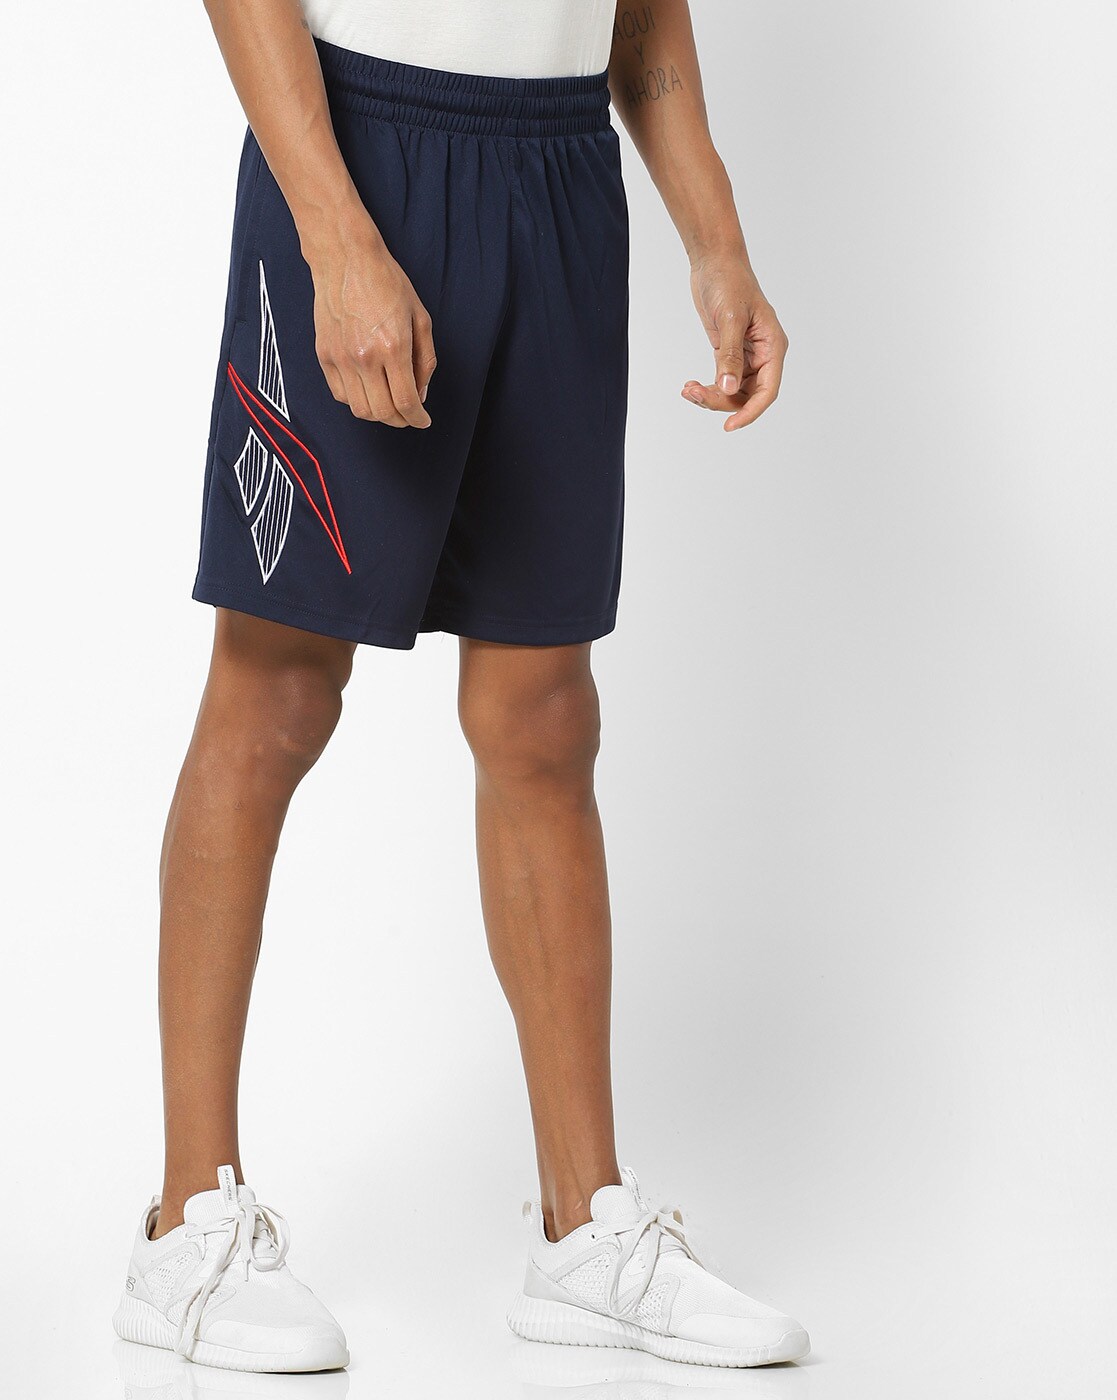 Shorts & 3/4ths for Men by Reebok Classic Online